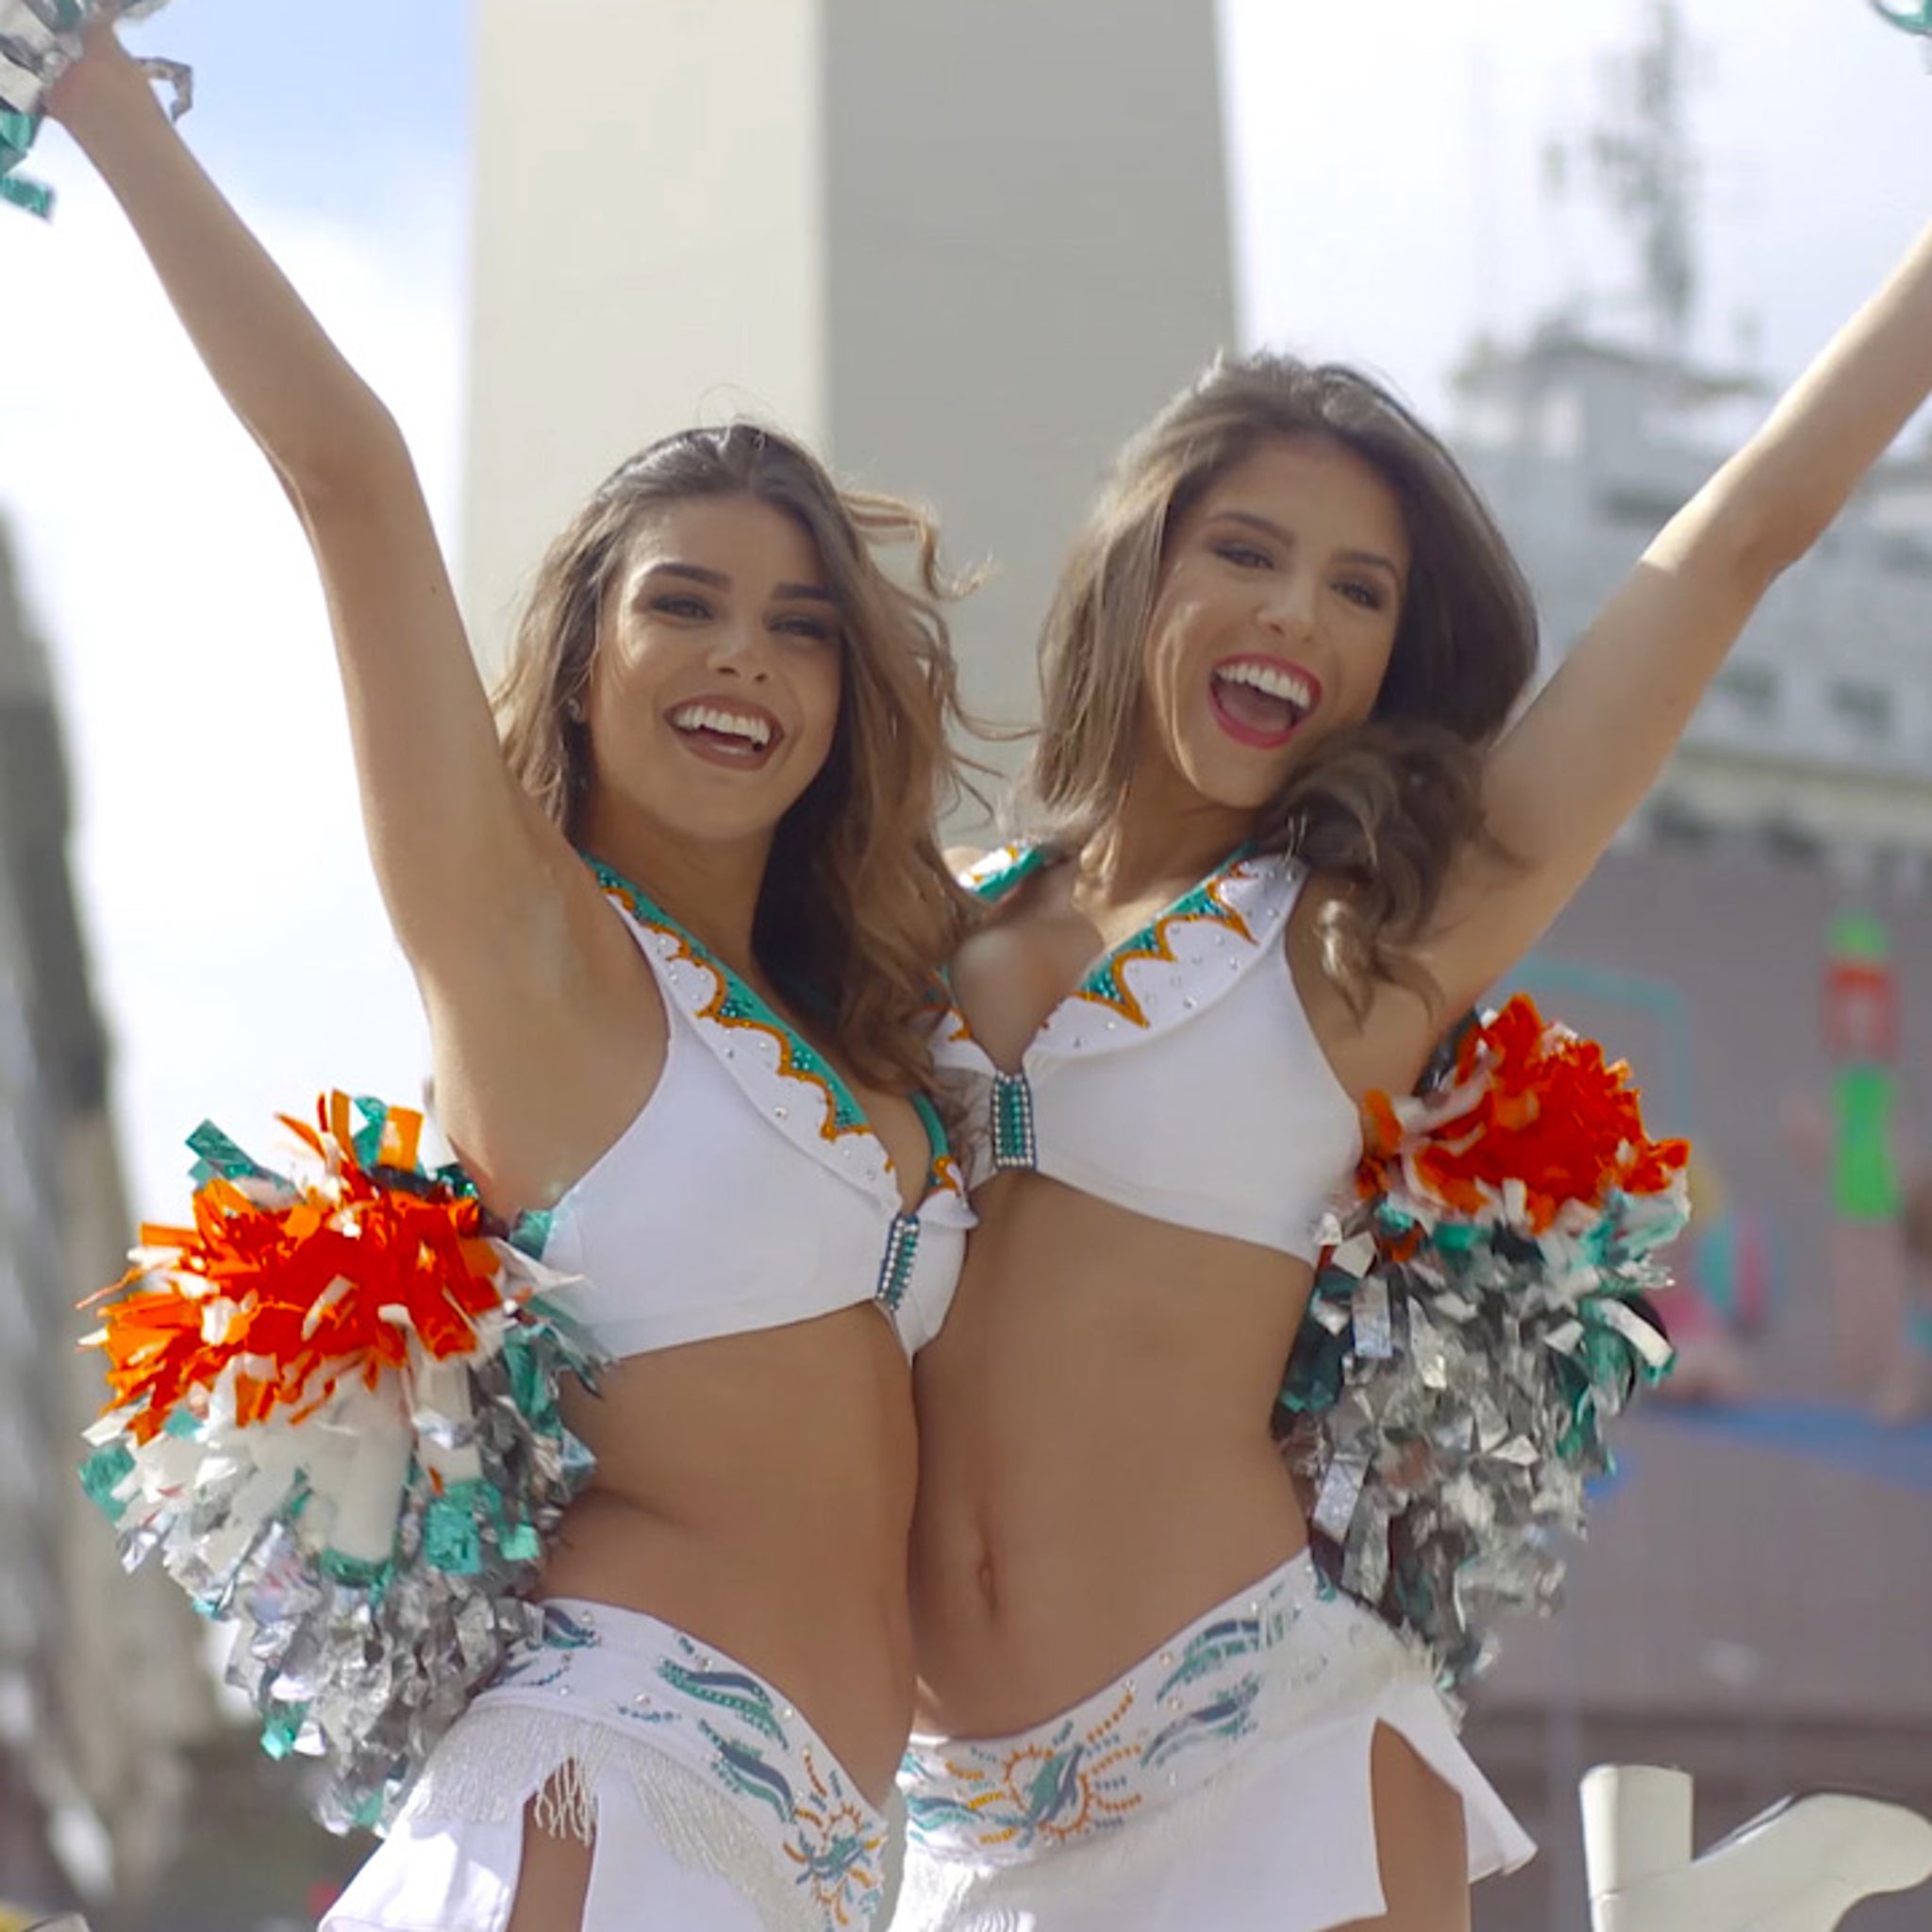 Miami Dolphins -- Combing Argentina for New Cheerleaders (VIDEO)